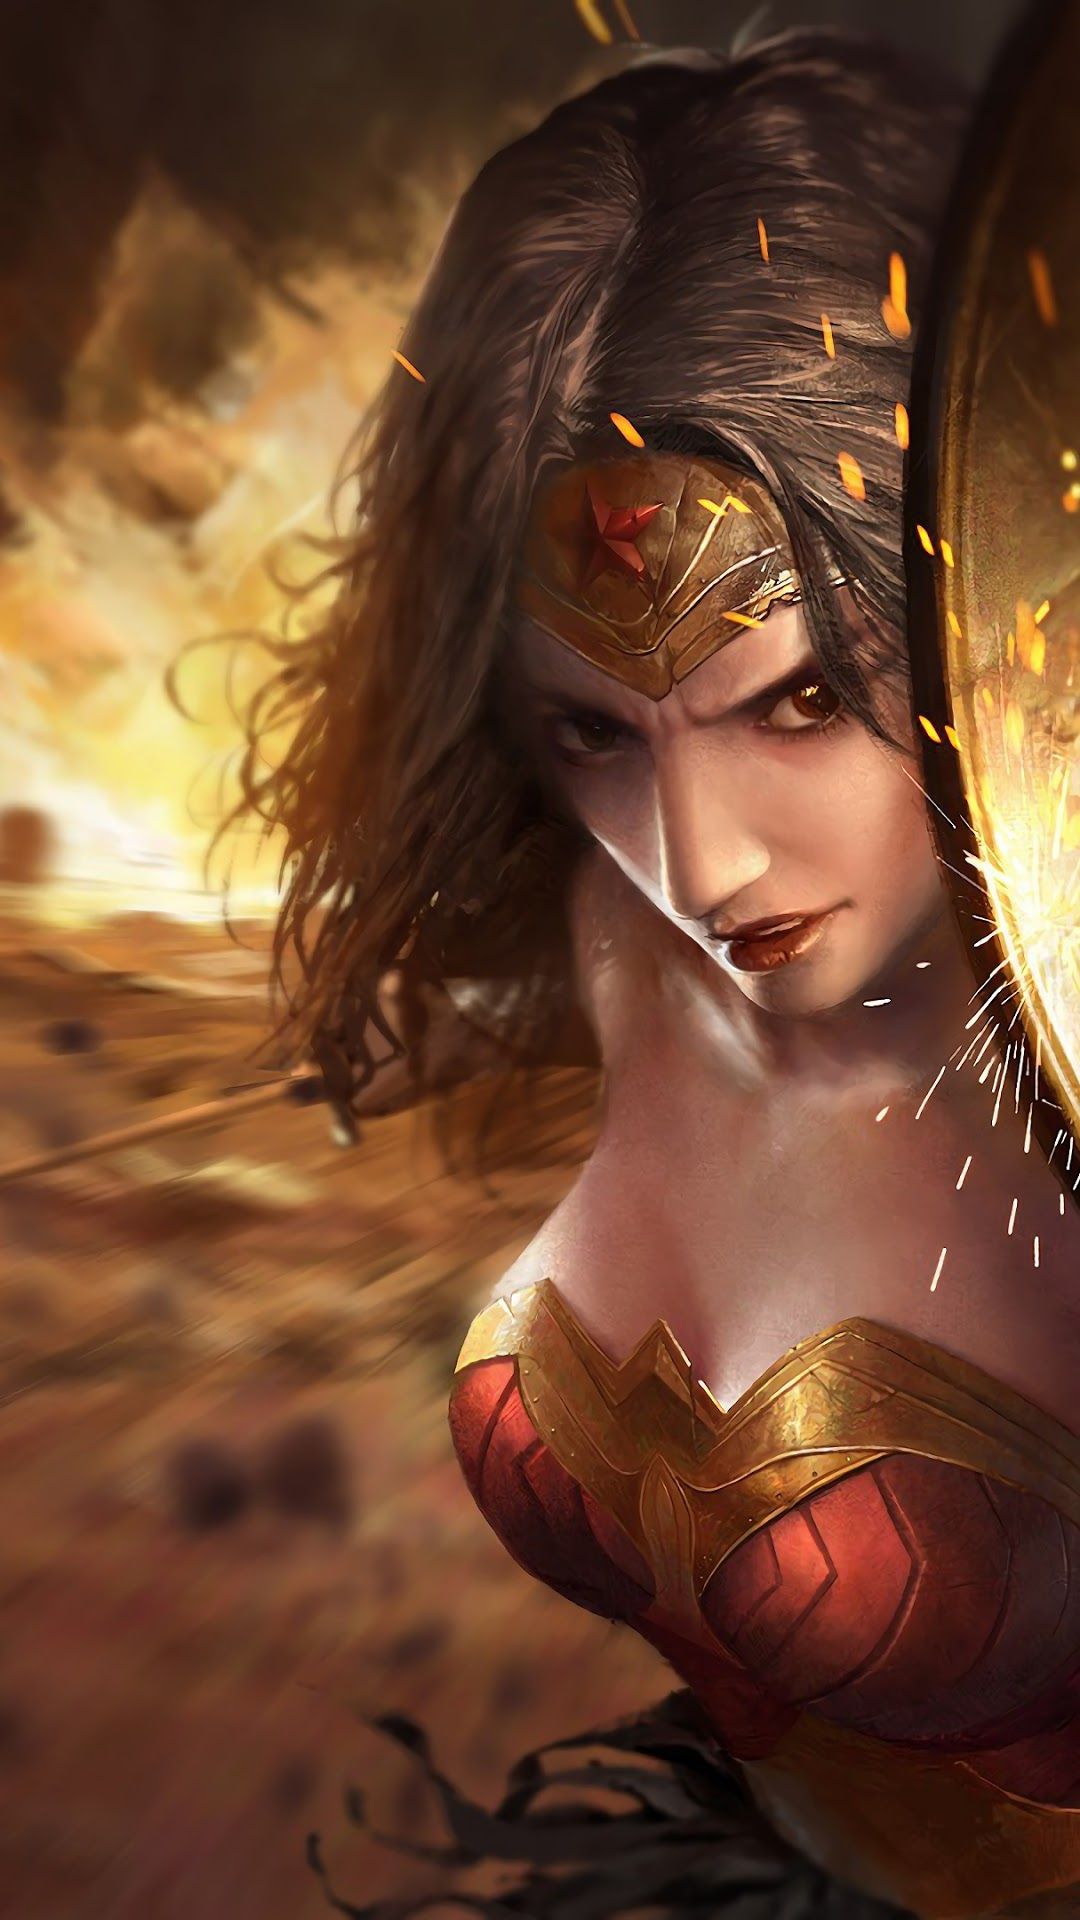 Wonder Woman phone HD Wallpaper, Image, Background, Photo and Picture. Mocah HD Wallpaper